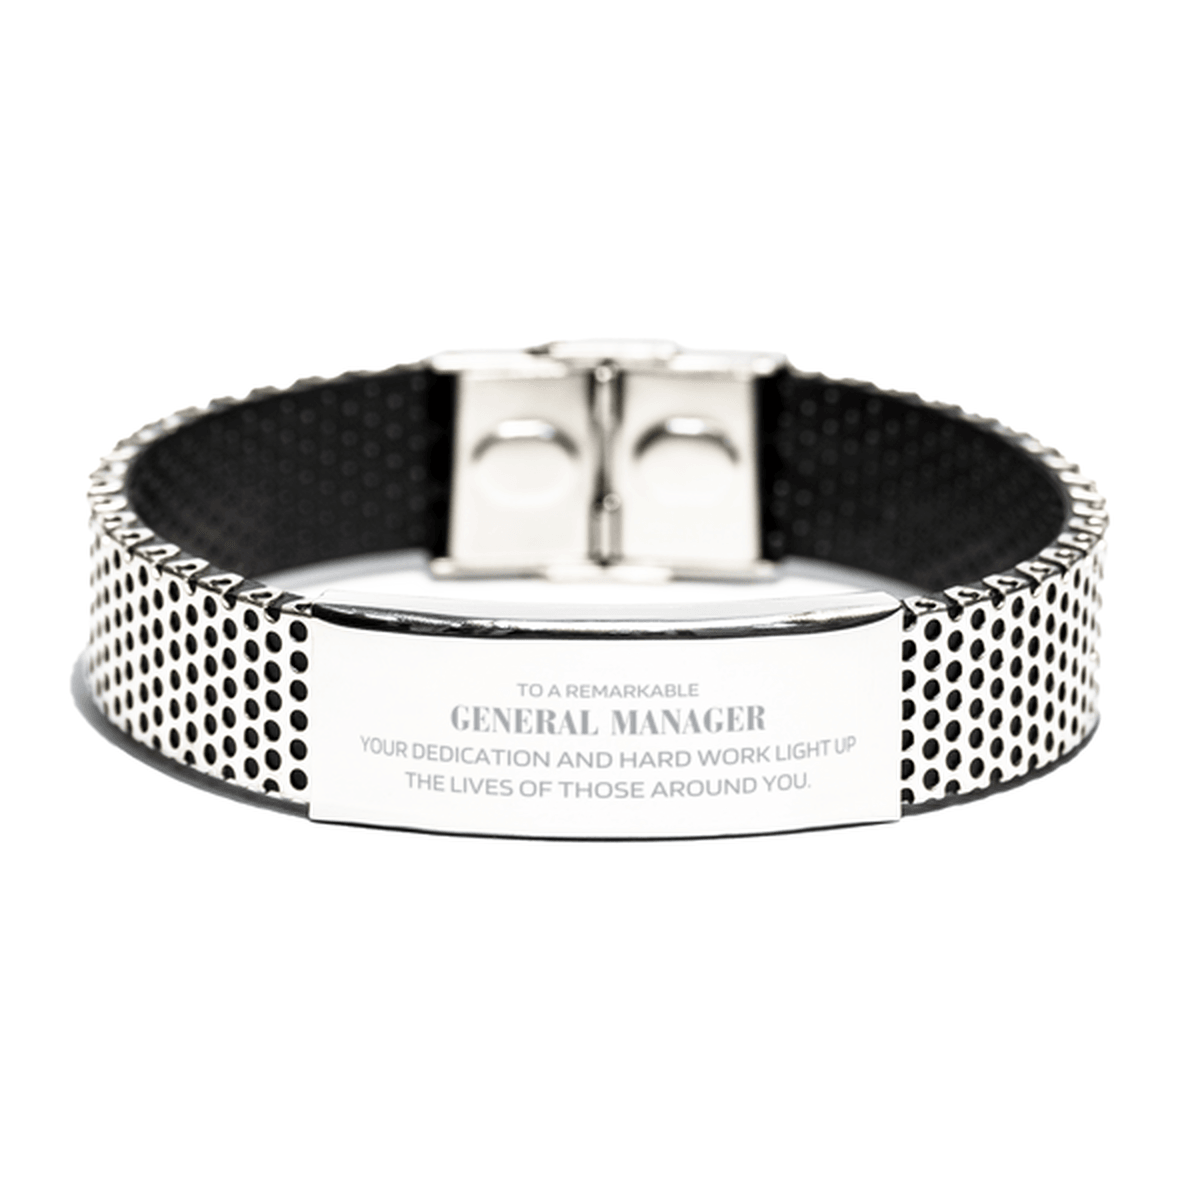 Remarkable General Manager Gifts, Your dedication and hard work, Inspirational Birthday Christmas Unique Stainless Steel Bracelet For General Manager, Coworkers, Men, Women, Friends - Mallard Moon Gift Shop